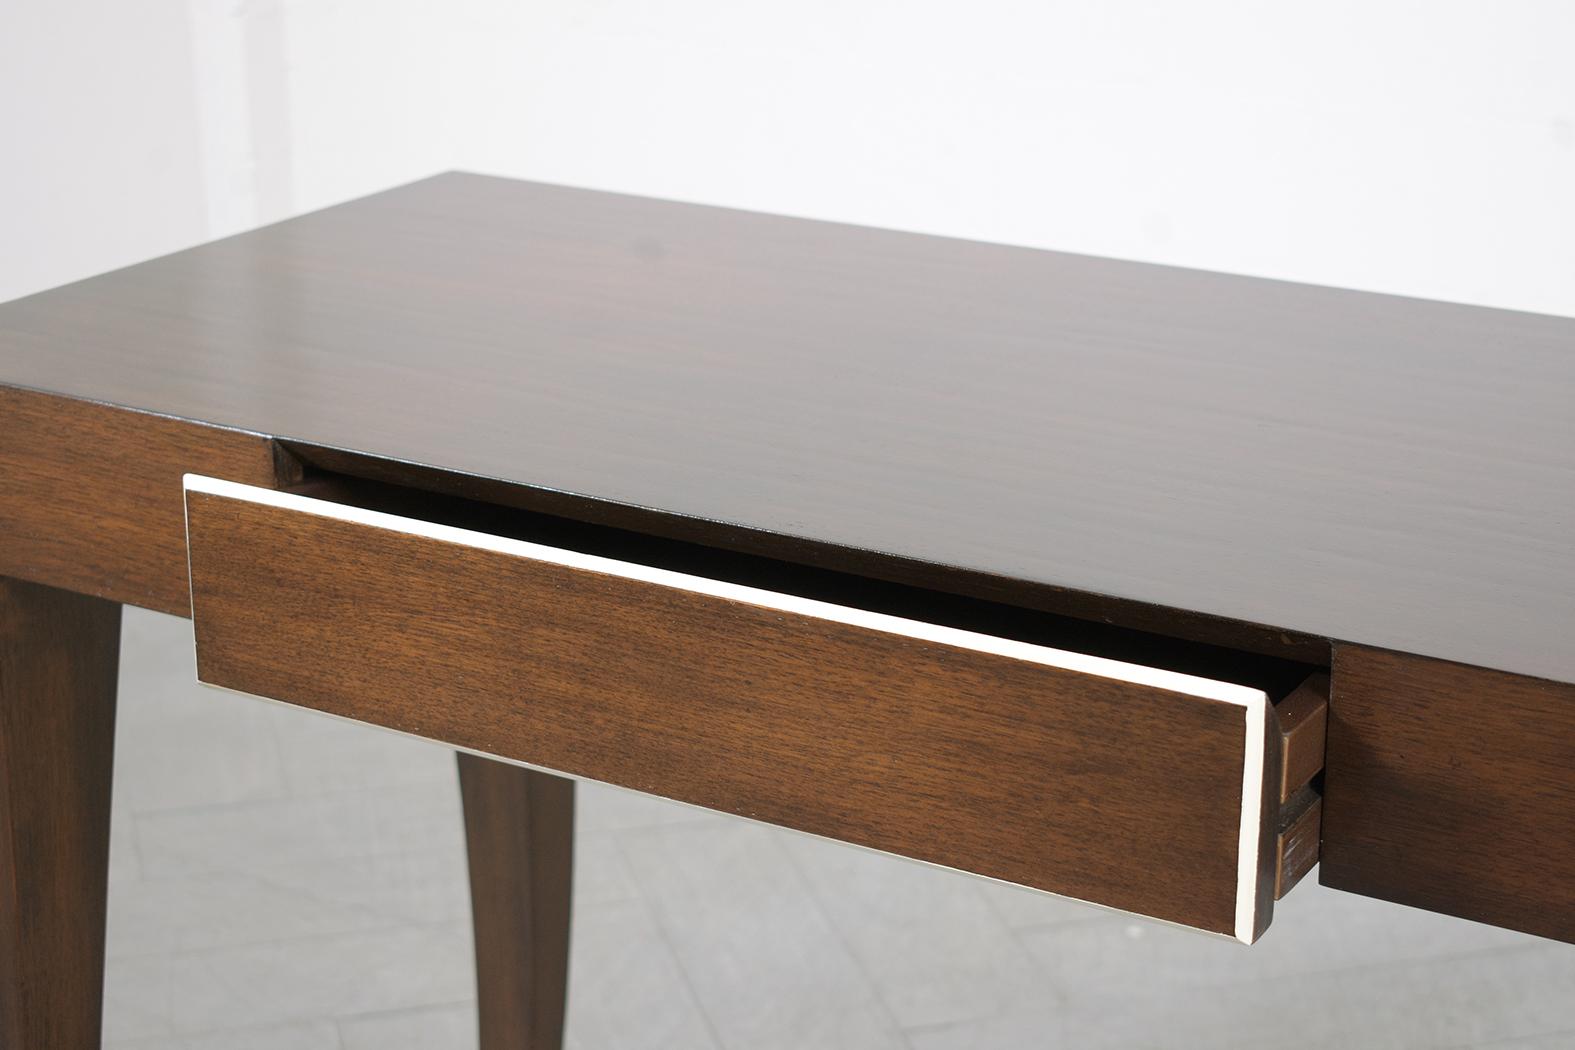 Carved 1970's Mid-Century Modern Lacquered Desk